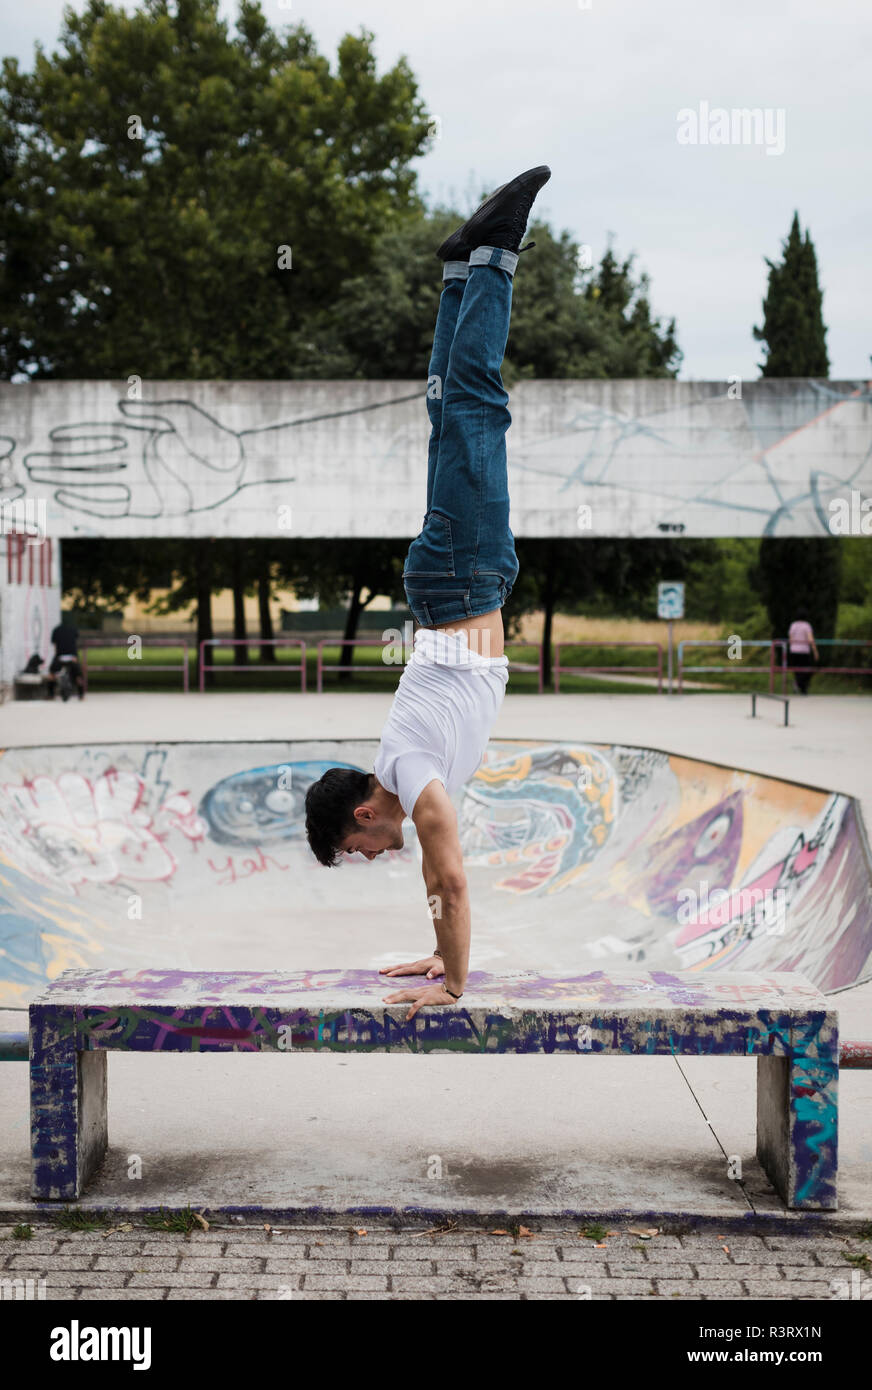 Young man doing a handstand on bench in skatepark Stock Photo